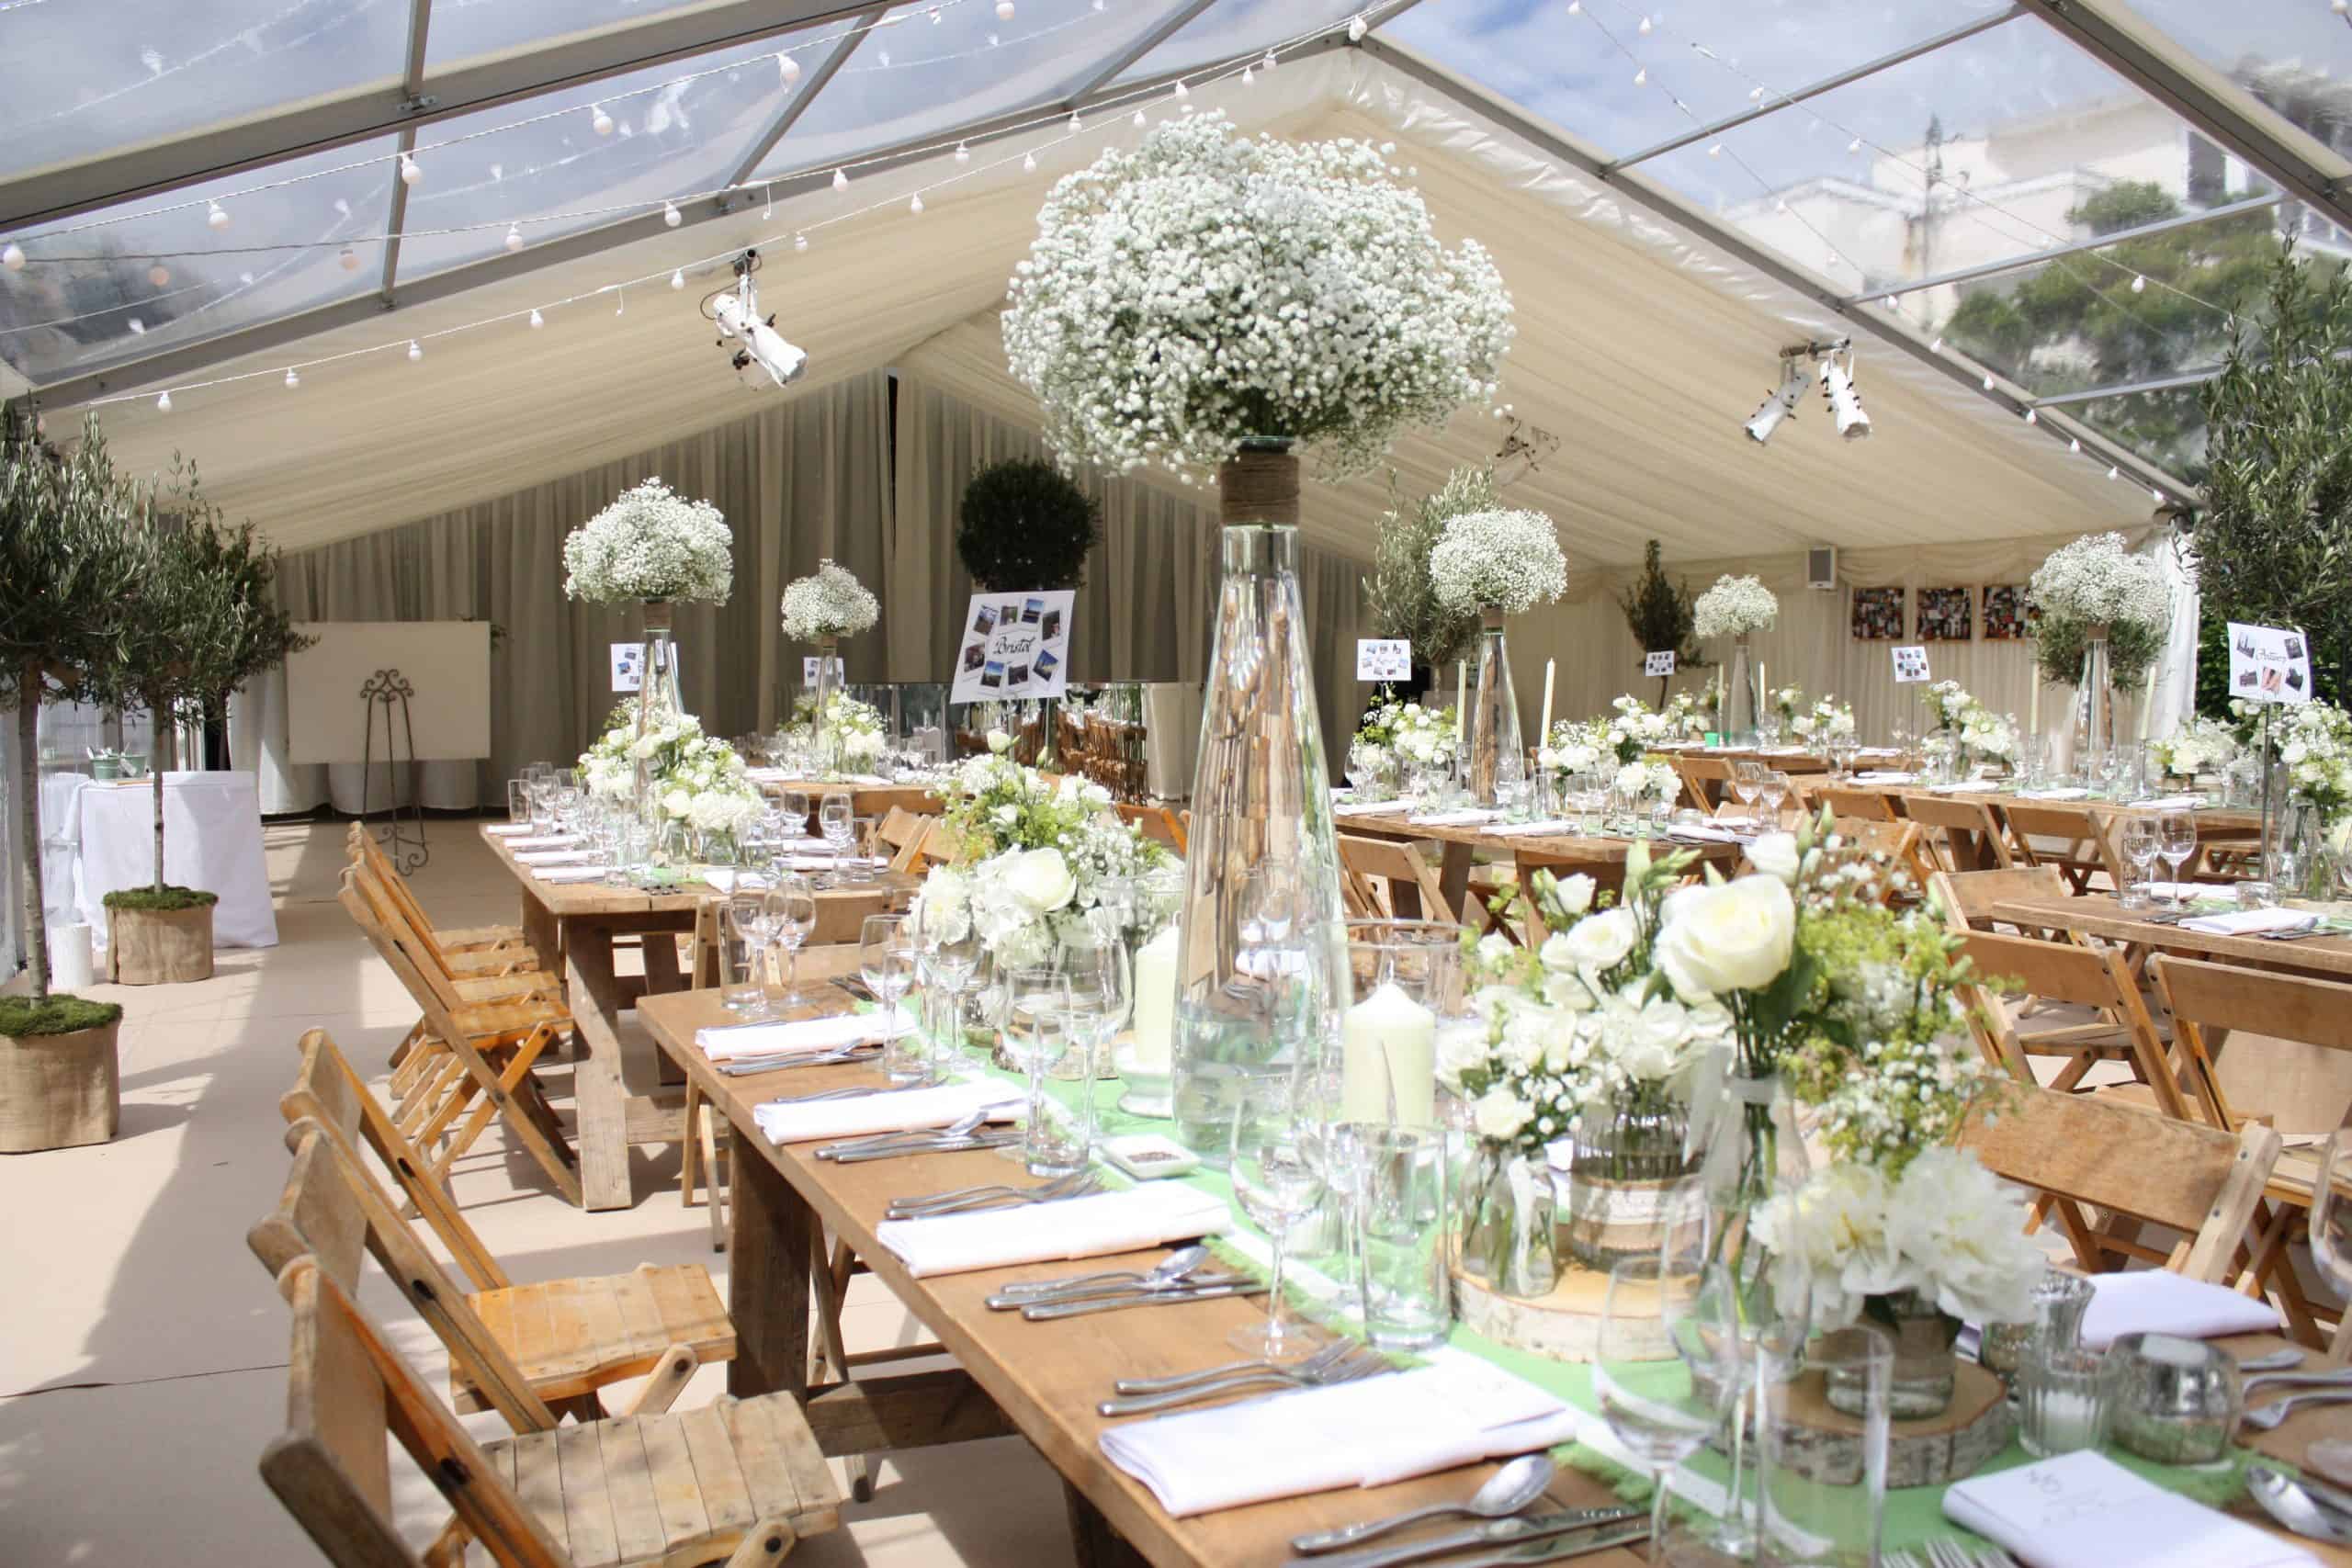 Beautiful Bristol Back Garden Wedding - rustic tables and white floral centrepieces in marquee